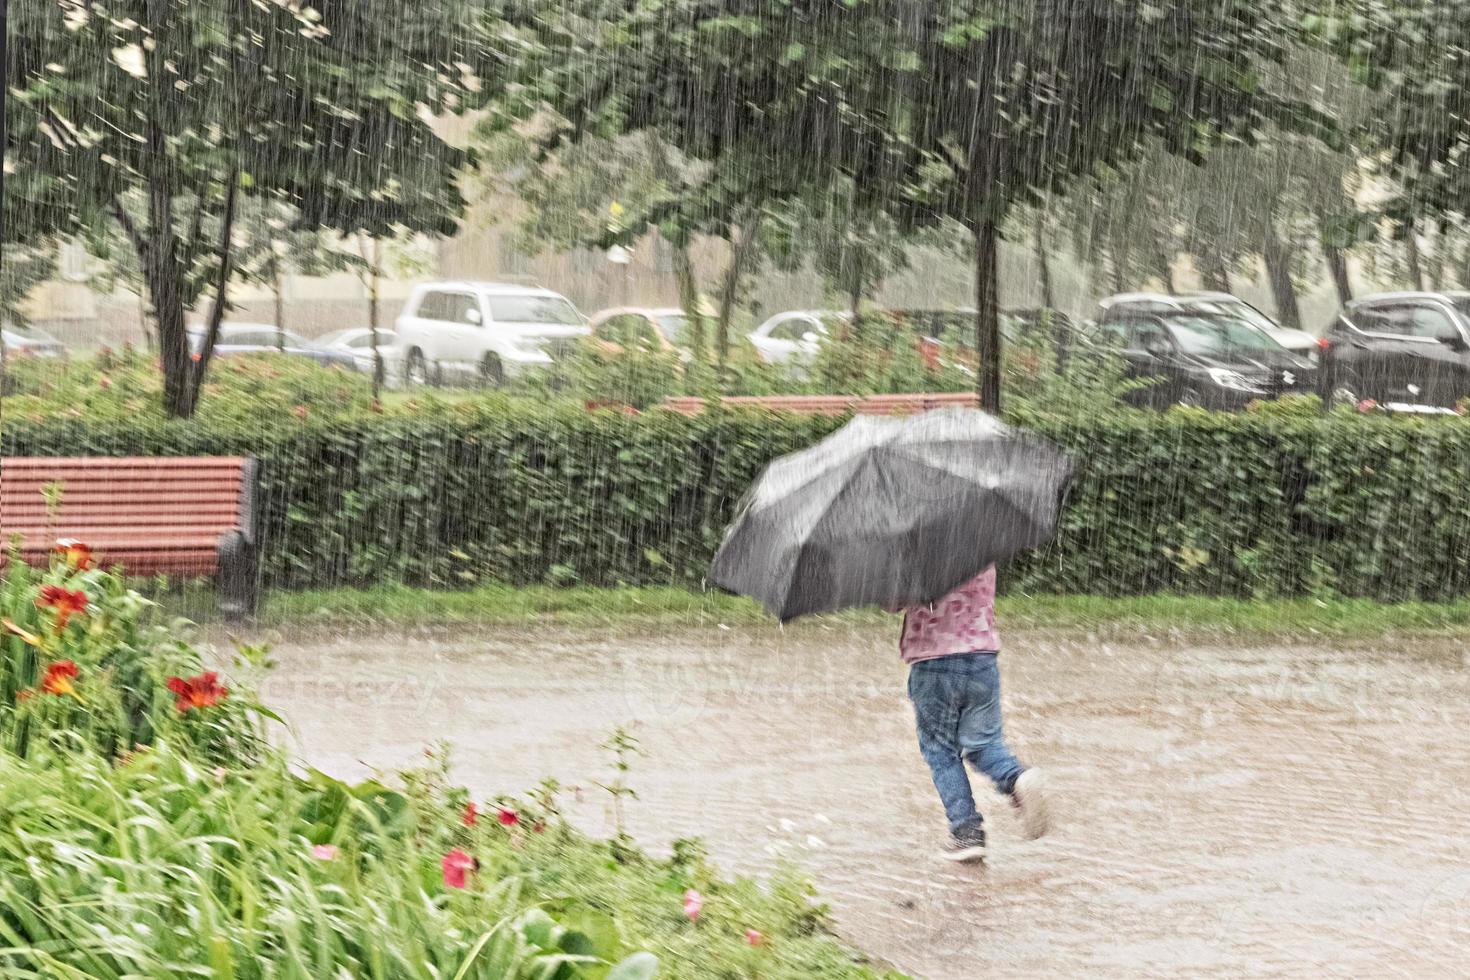 A little girl is having fun running around with an umbrella in the heavy rain. Rainy day photo